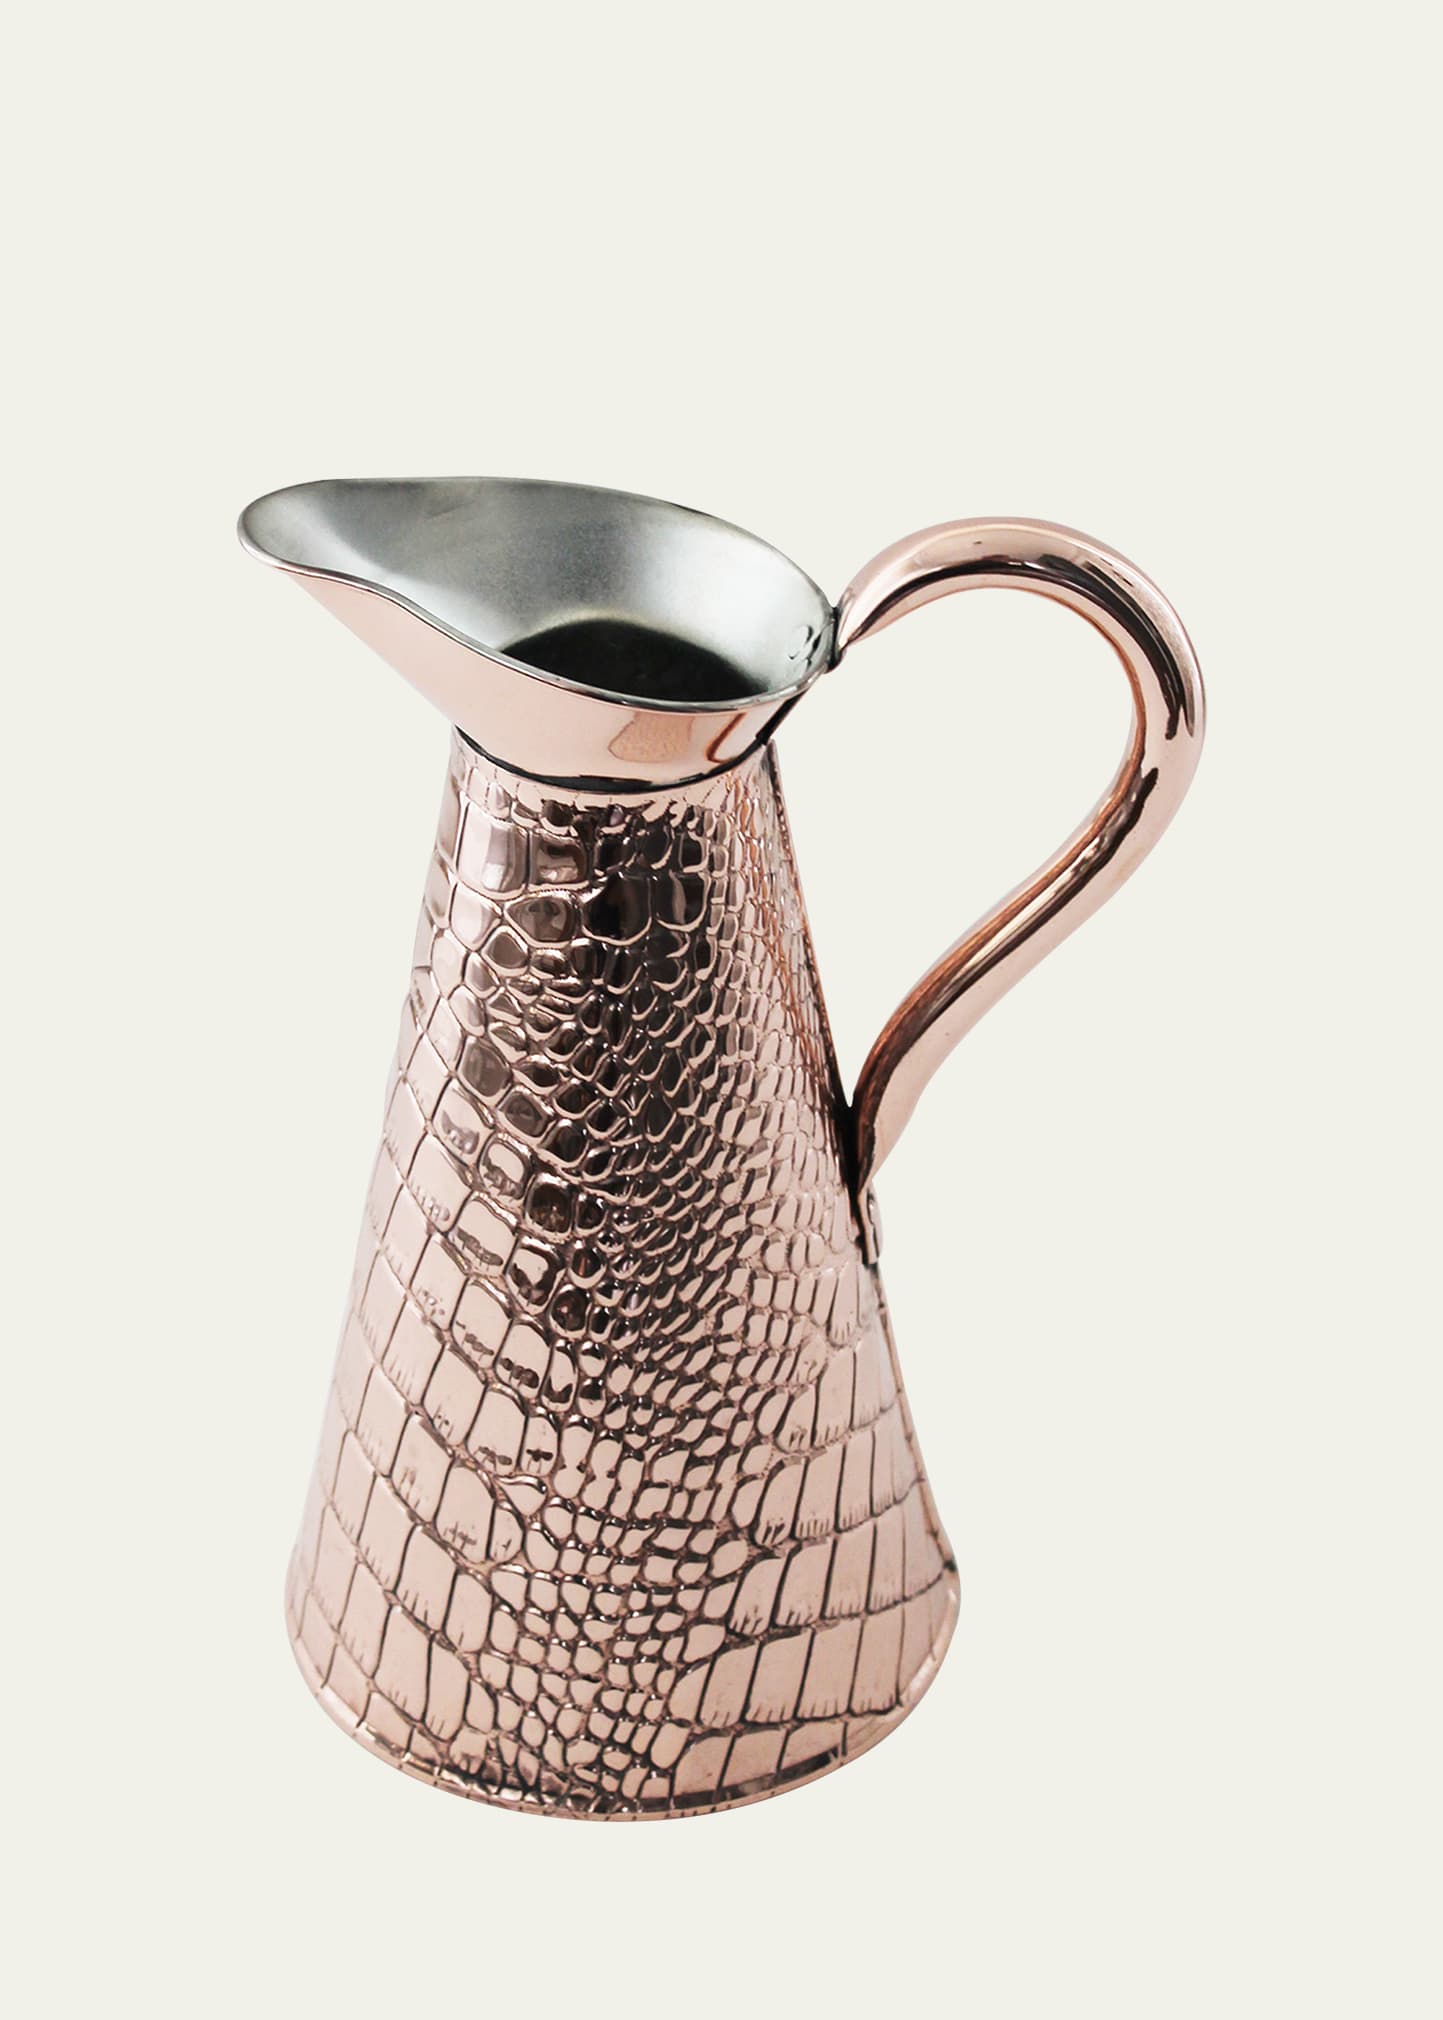 Antique English JS & S Embossed Pitcher, Late 19th Century